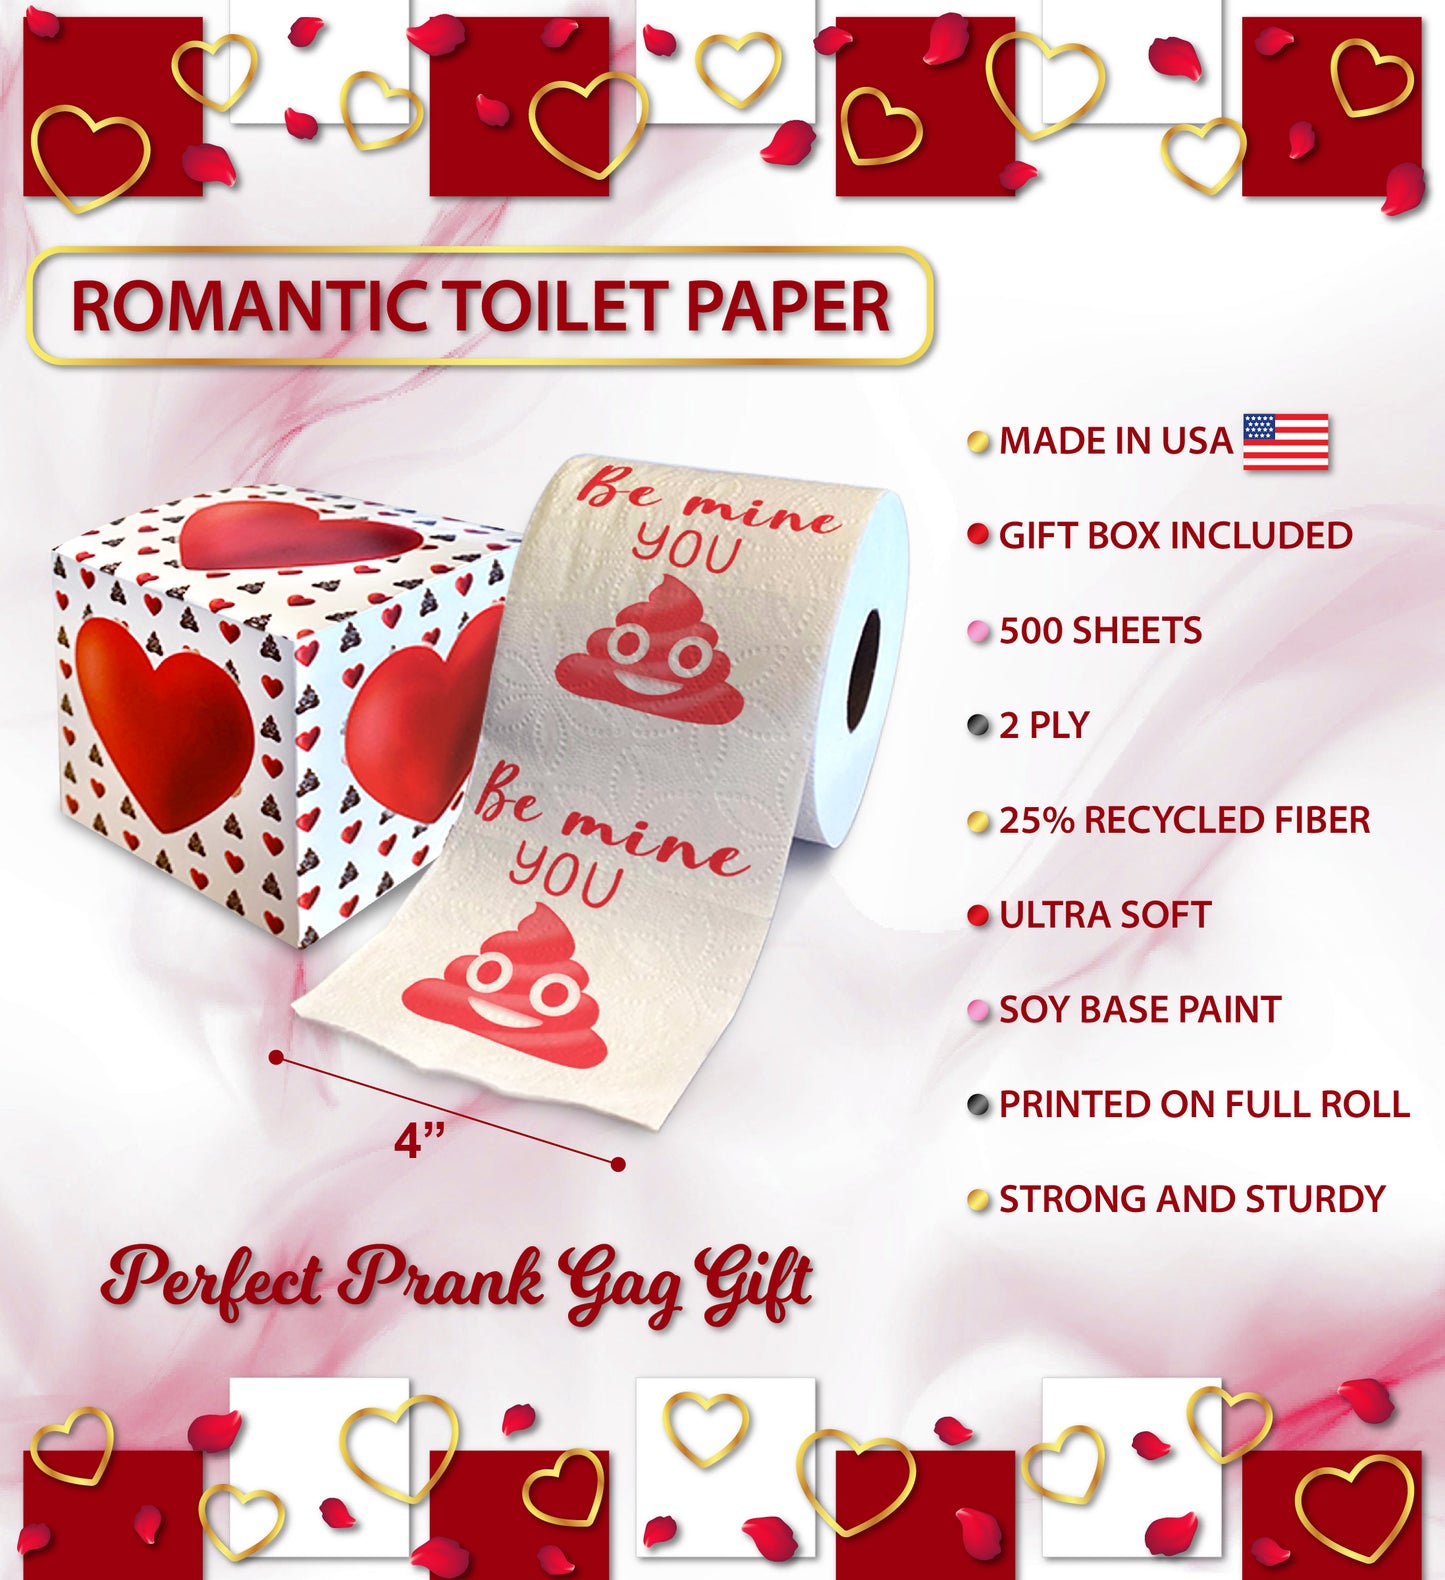 Printed TP Be Mine You Sh*t Funny Valentine's Printed Toilet Paper Roll Gag Gift